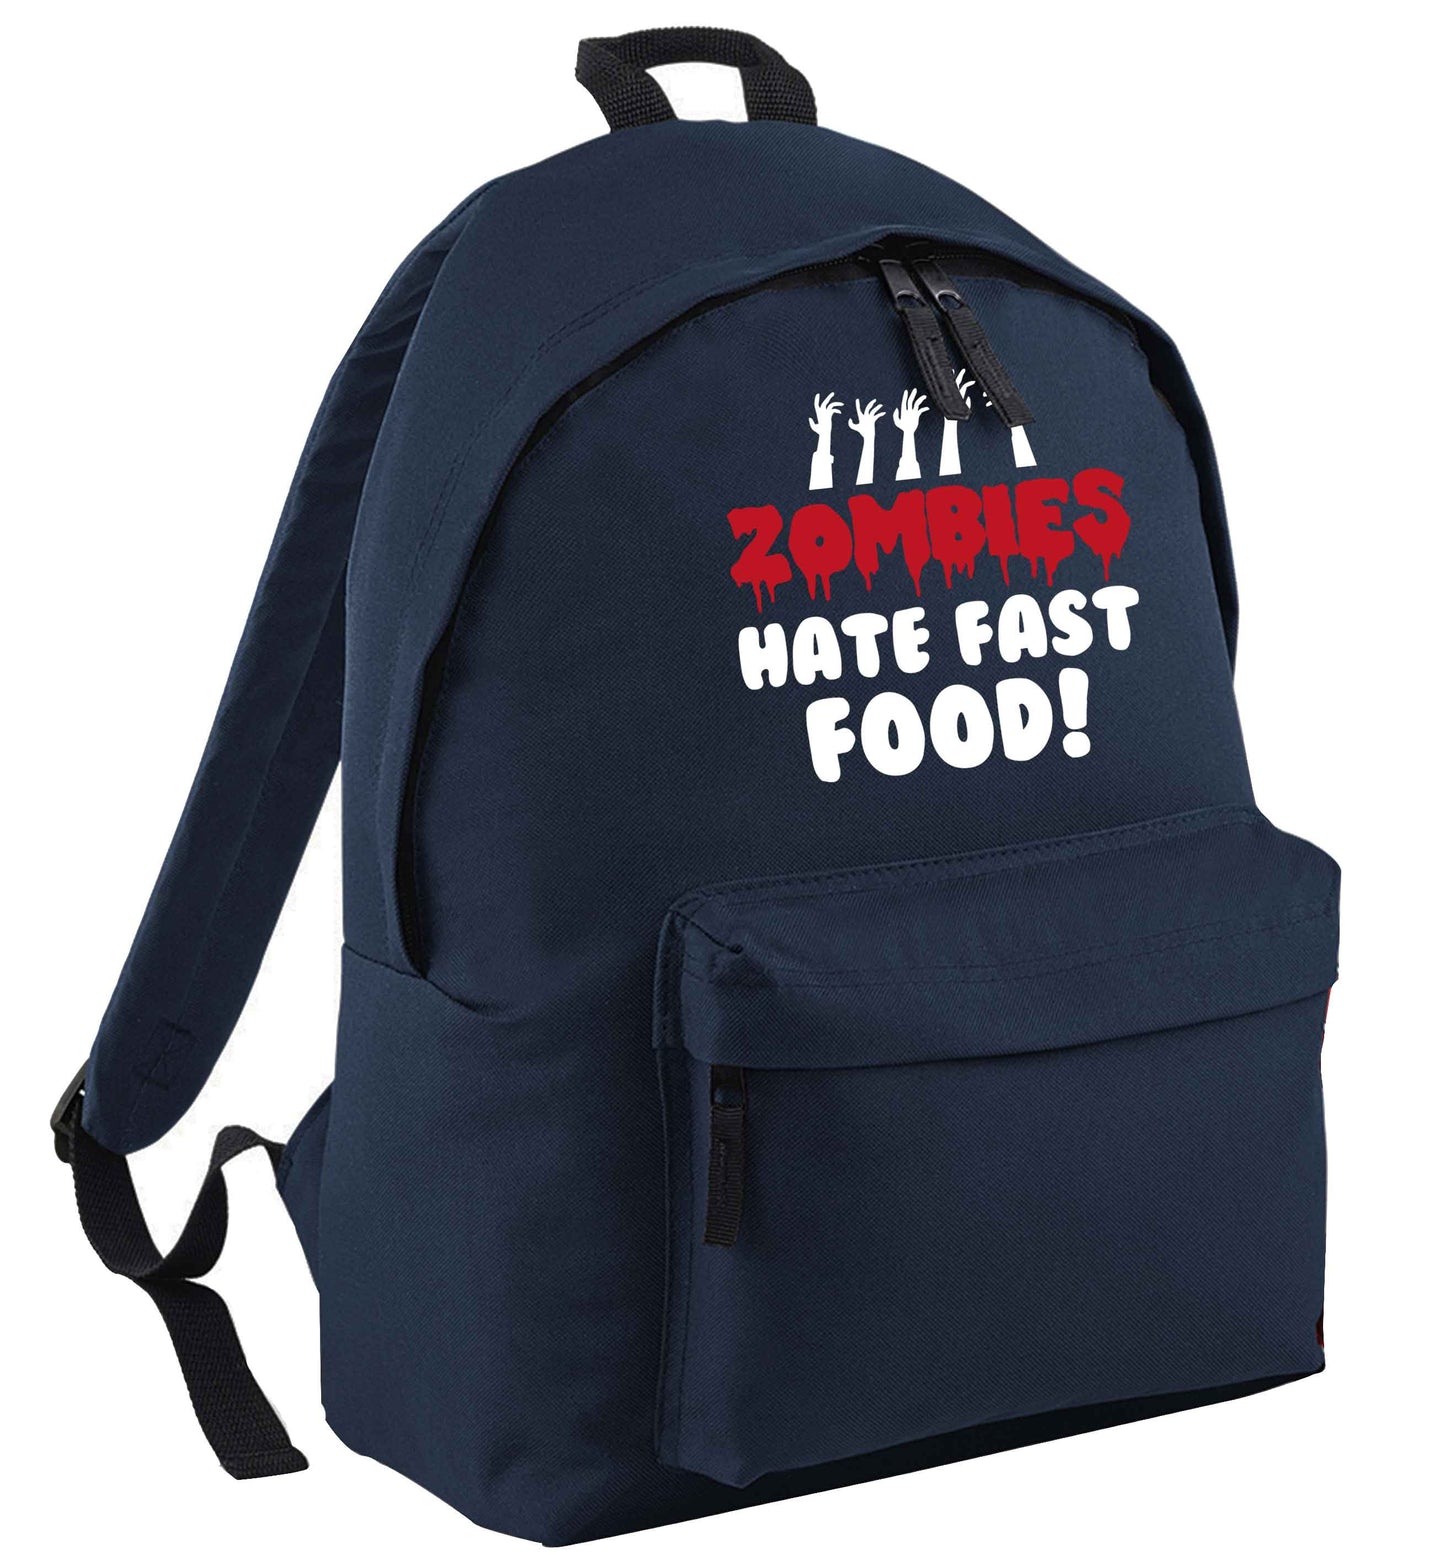 Zombies hate fast food navy adults backpack